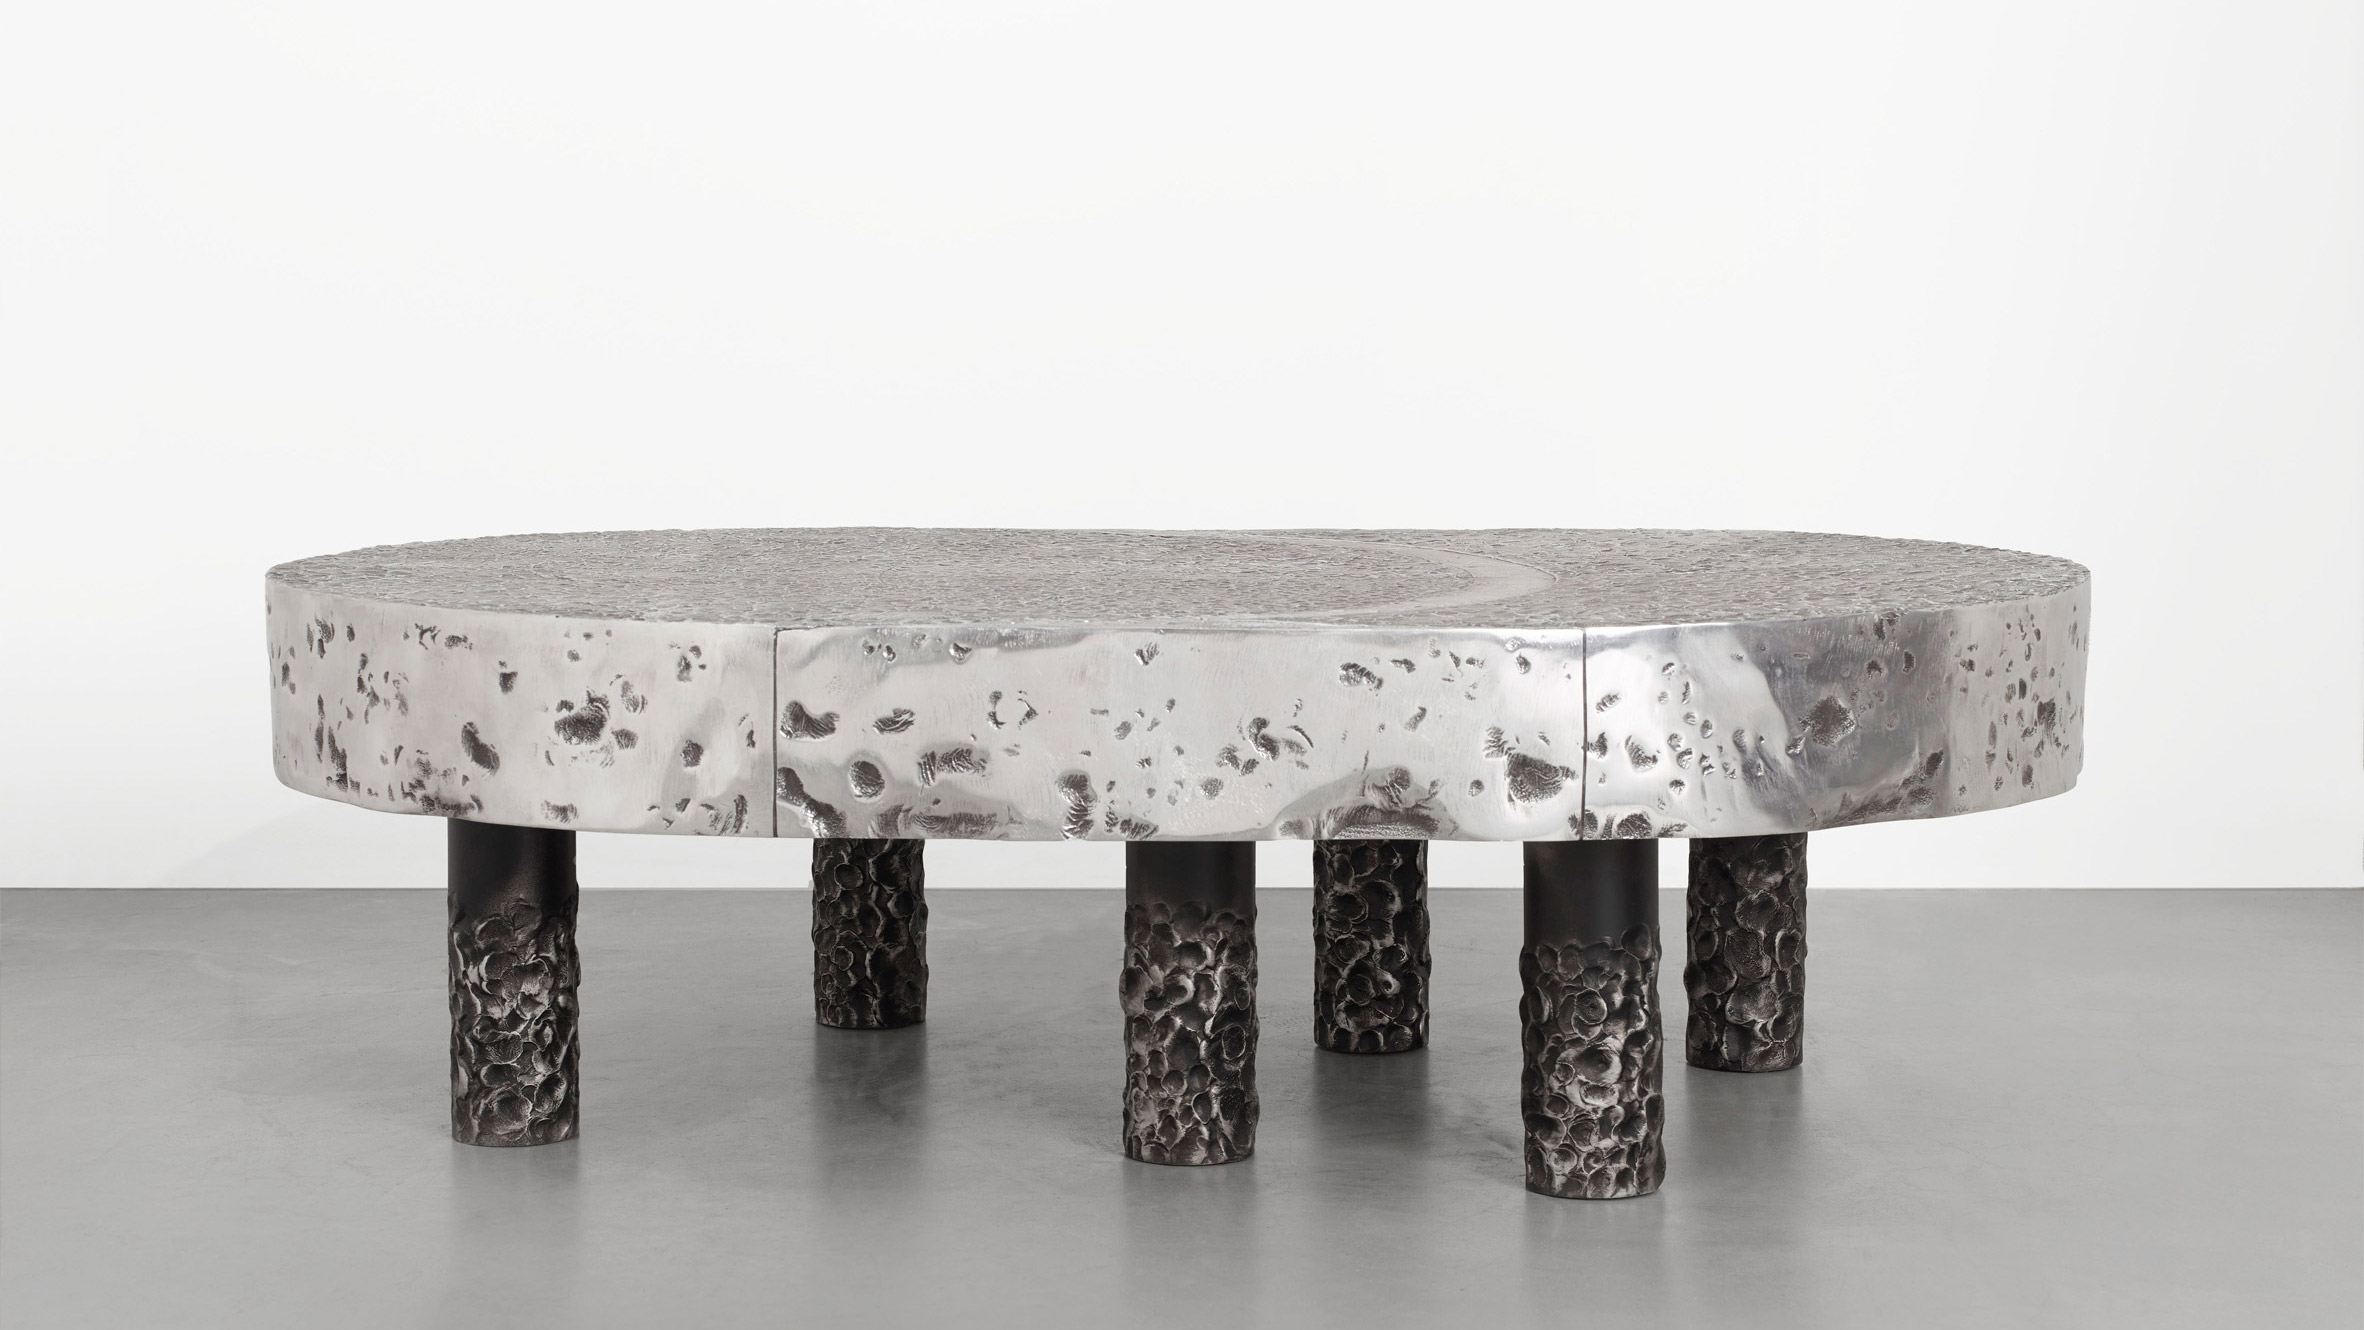 Vincent Dubourg's Vortex aluminium furniture goes on show in New York-17